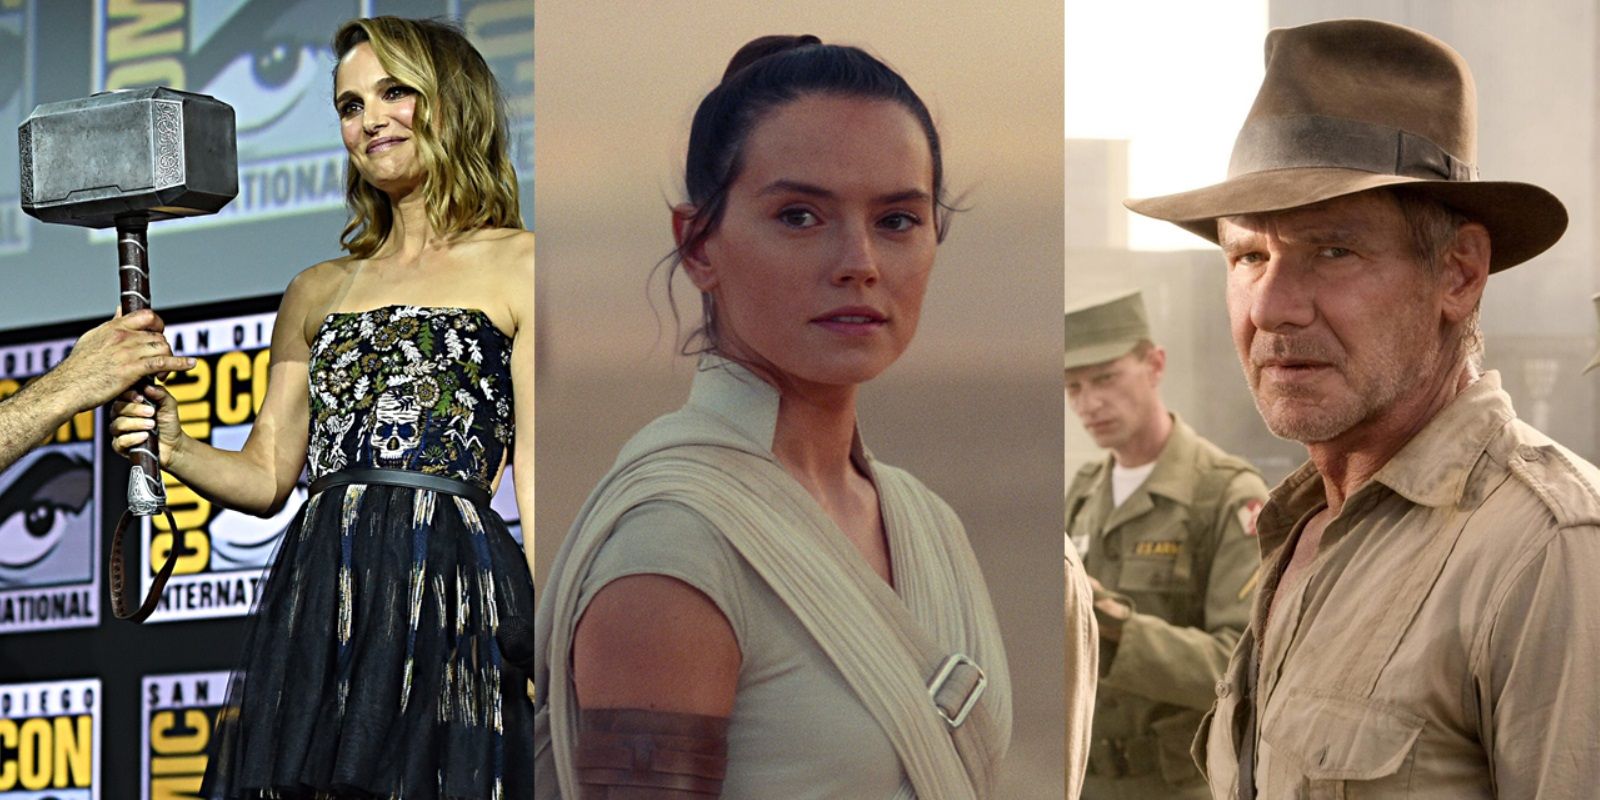 10 Upcoming Projects Featuring Star Wars Actors